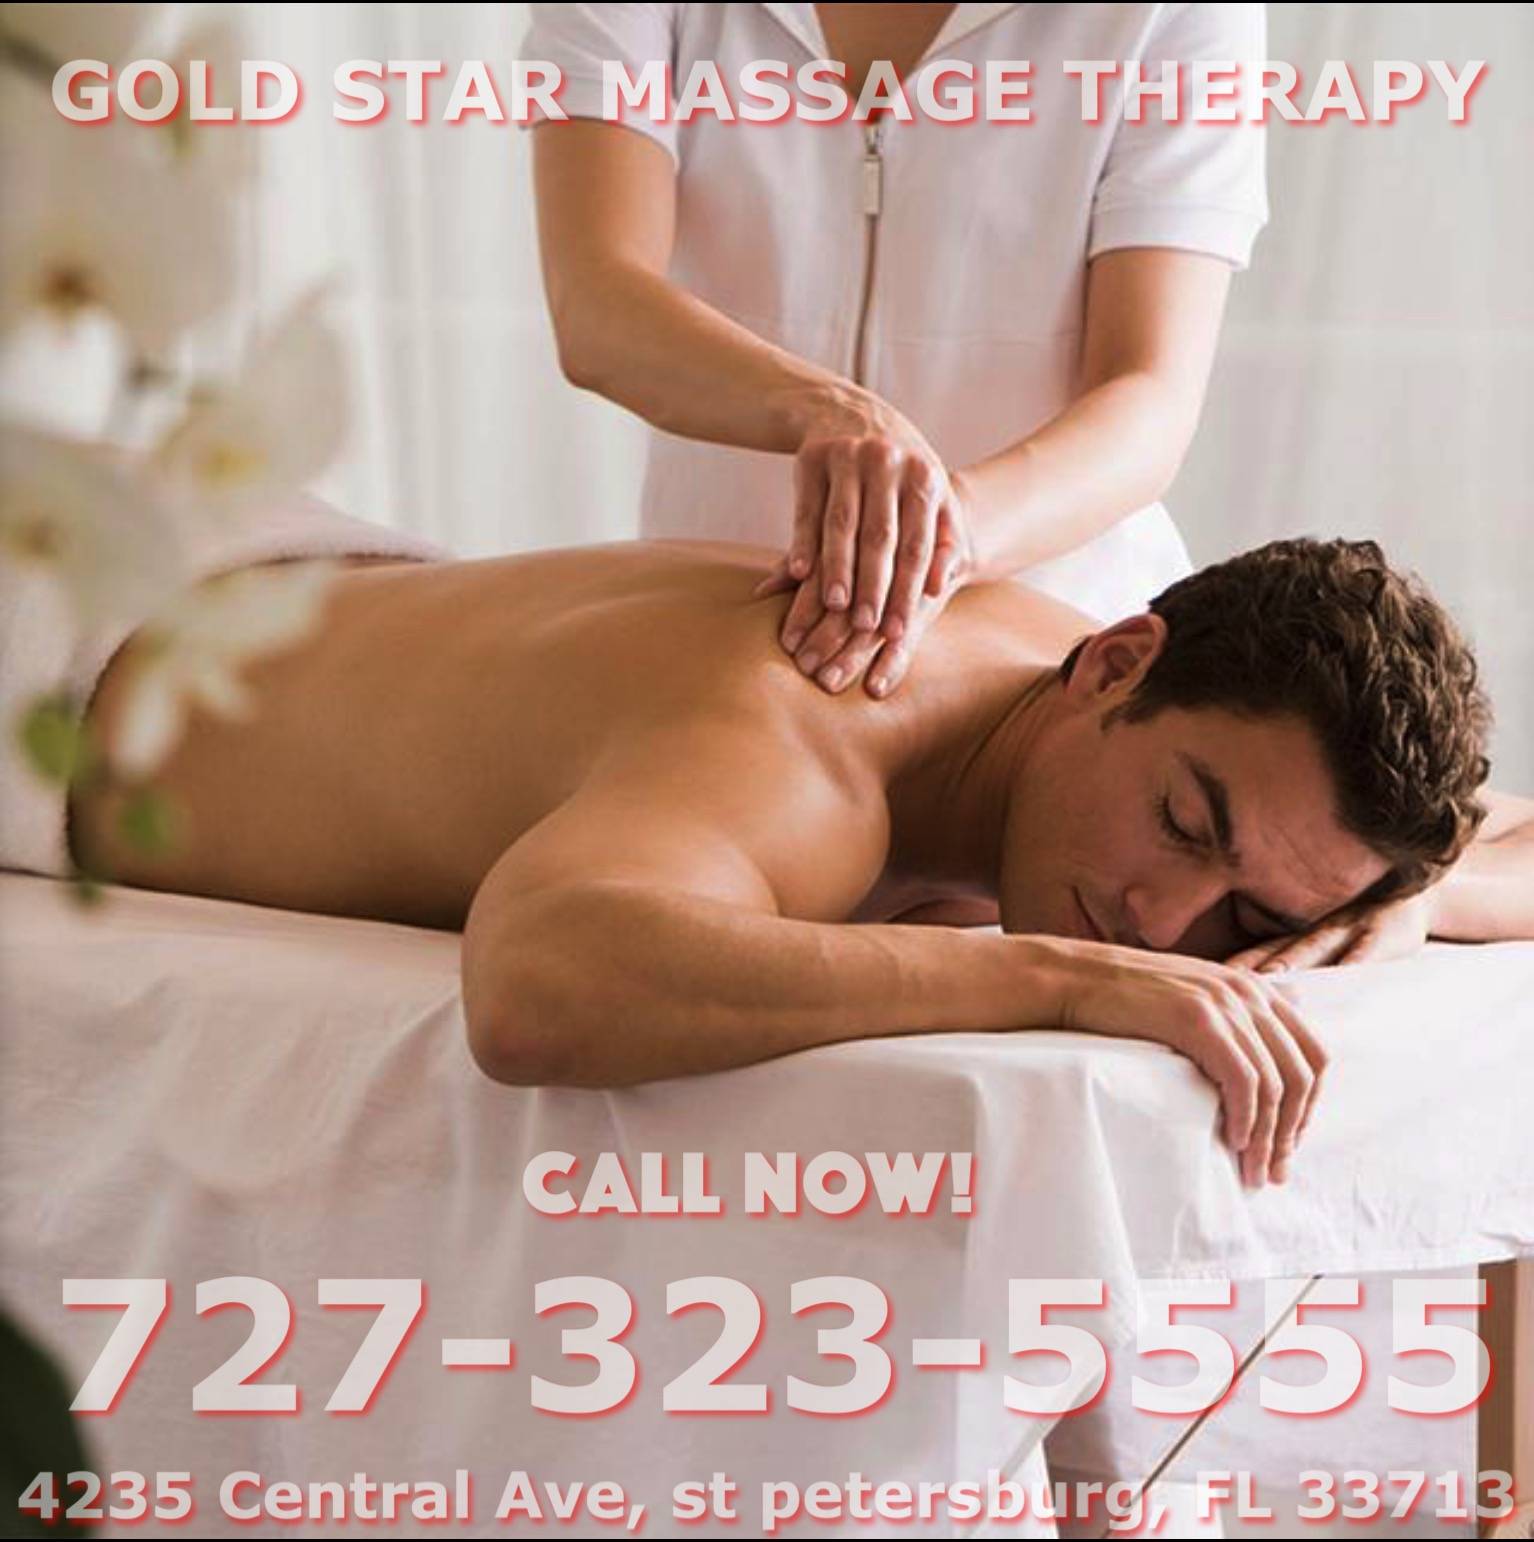 Gold Star Massage Therapy | 4235 Central Avenue St. Petersburg, FL 33713 United States | Phone: 727-323-5555